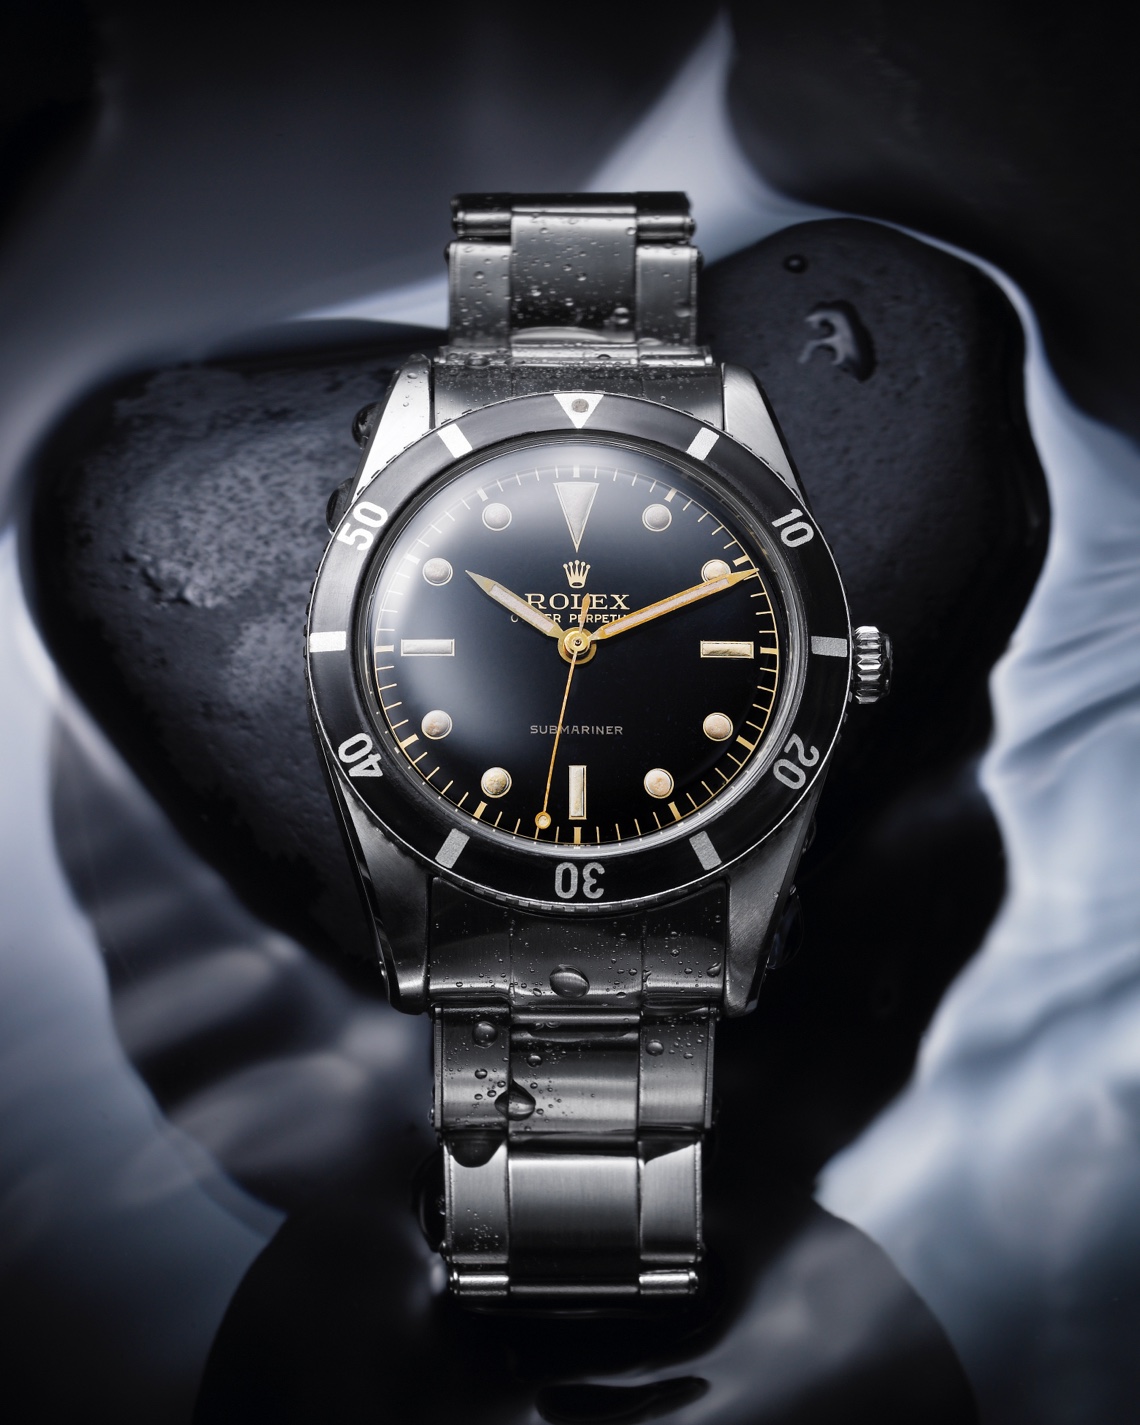 The reference among divers’ watches